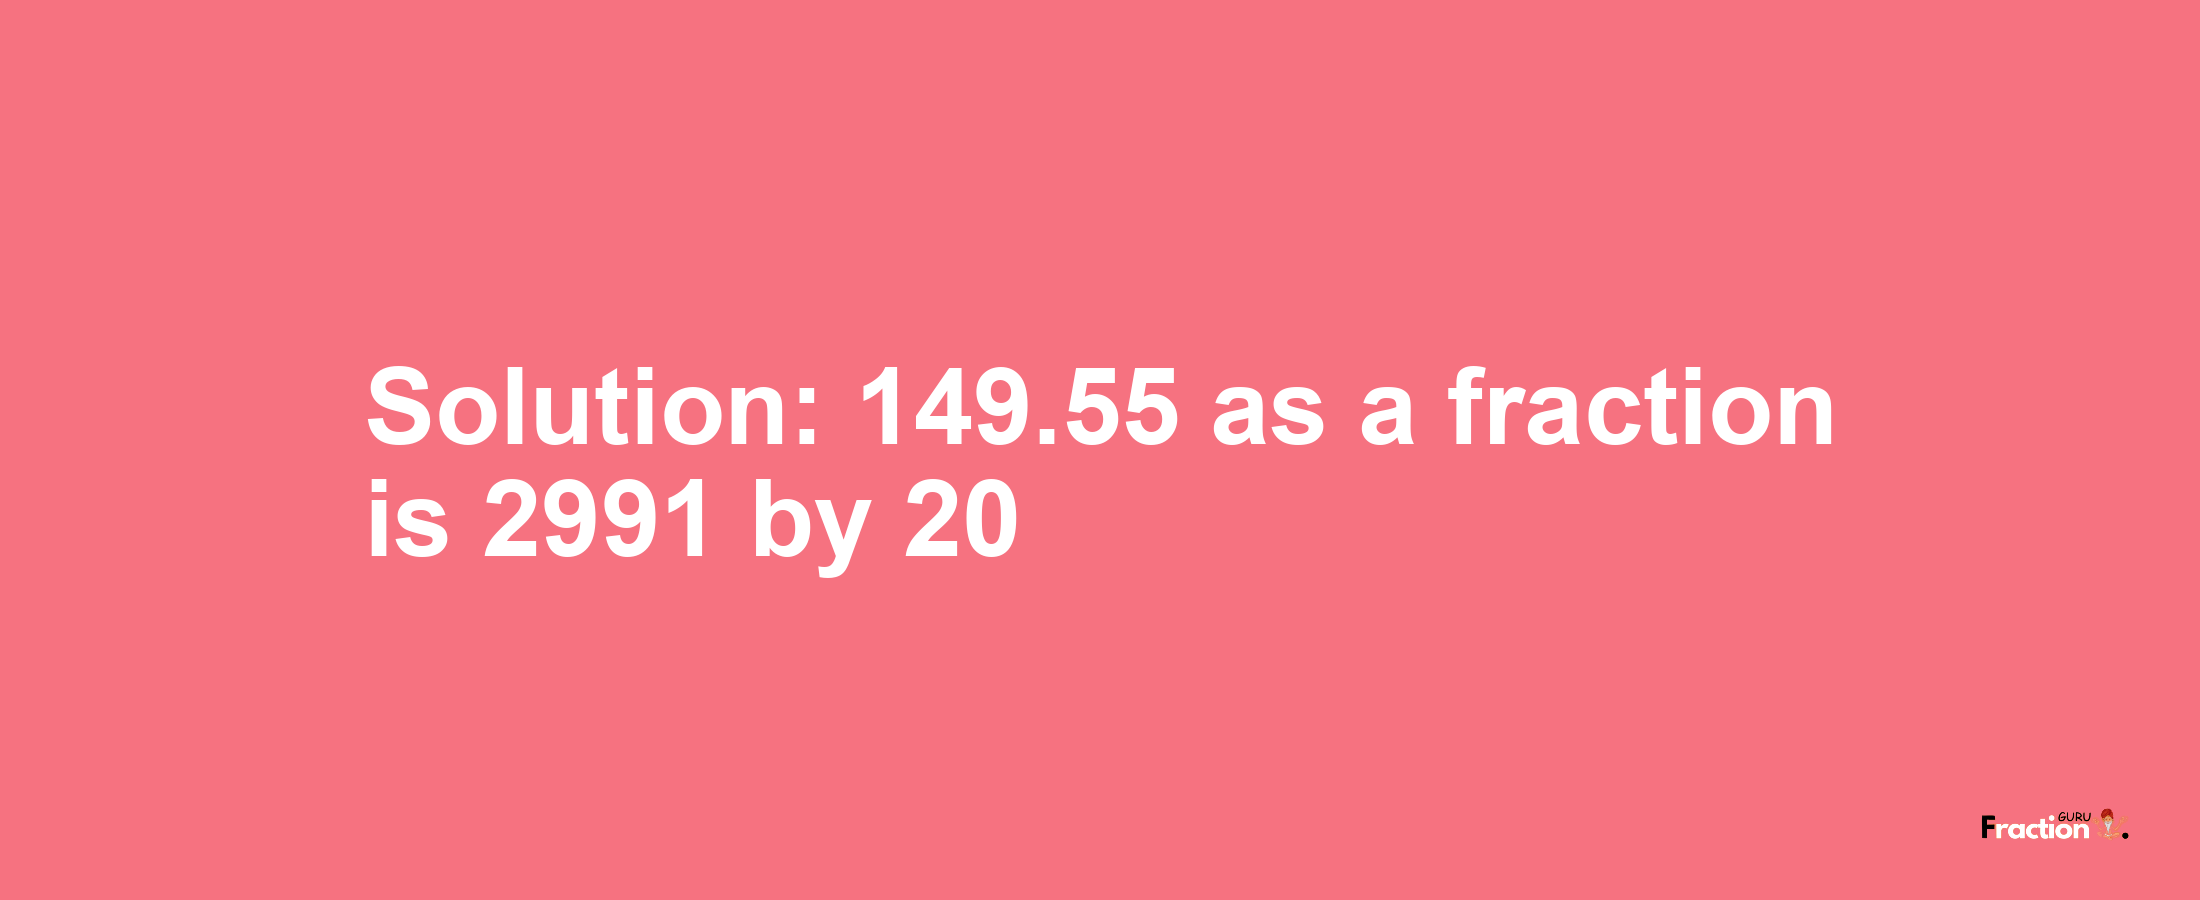 Solution:149.55 as a fraction is 2991/20